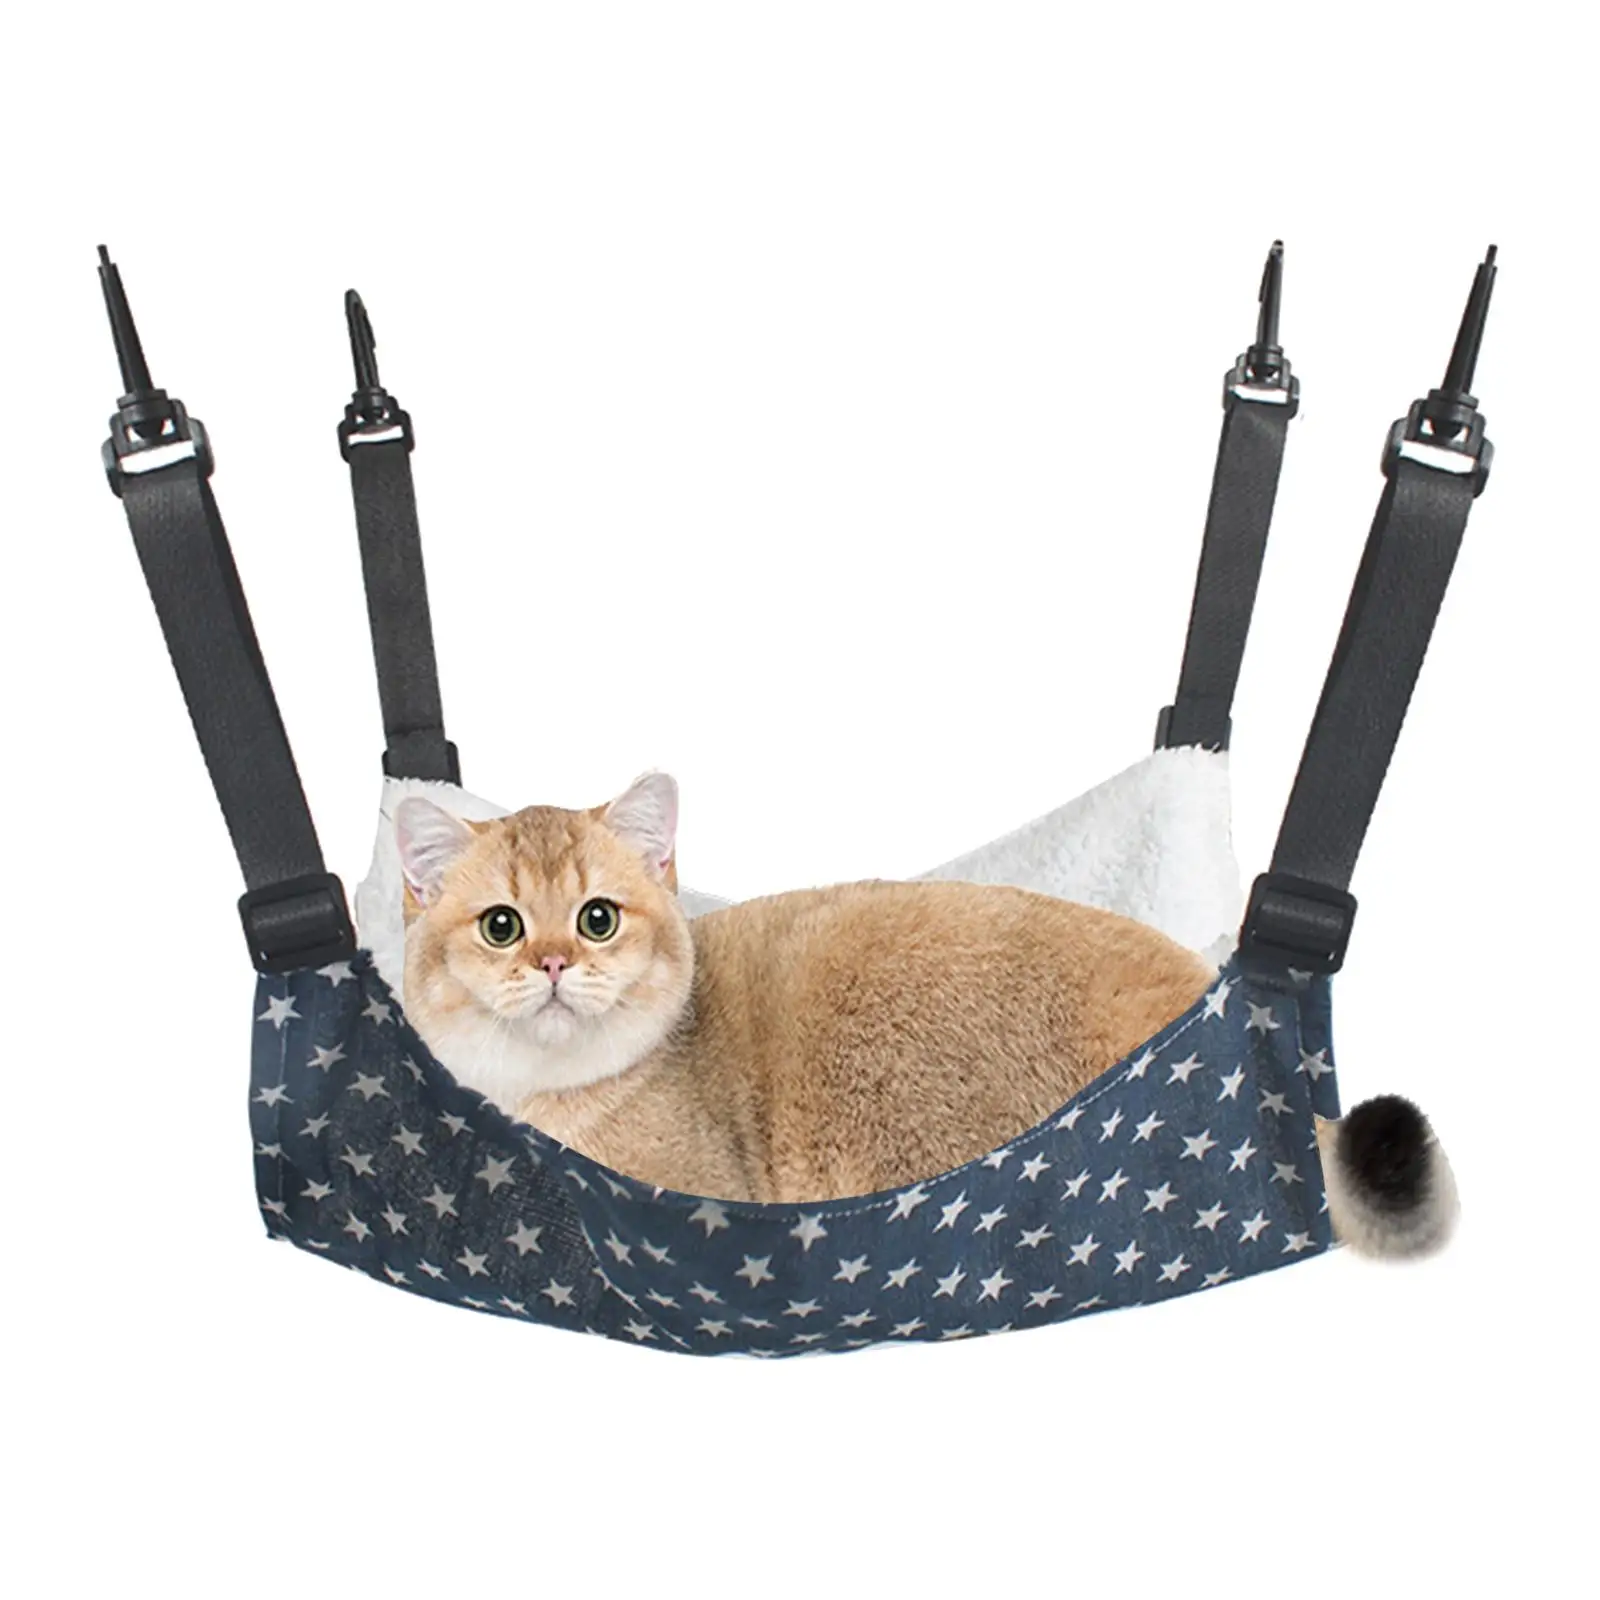 Cat Hammock Bed Adjustable Straps Sleeping Hanging Soft Winter Warm for Hamster Squirrel Ferret Small Animals Guinea Pig